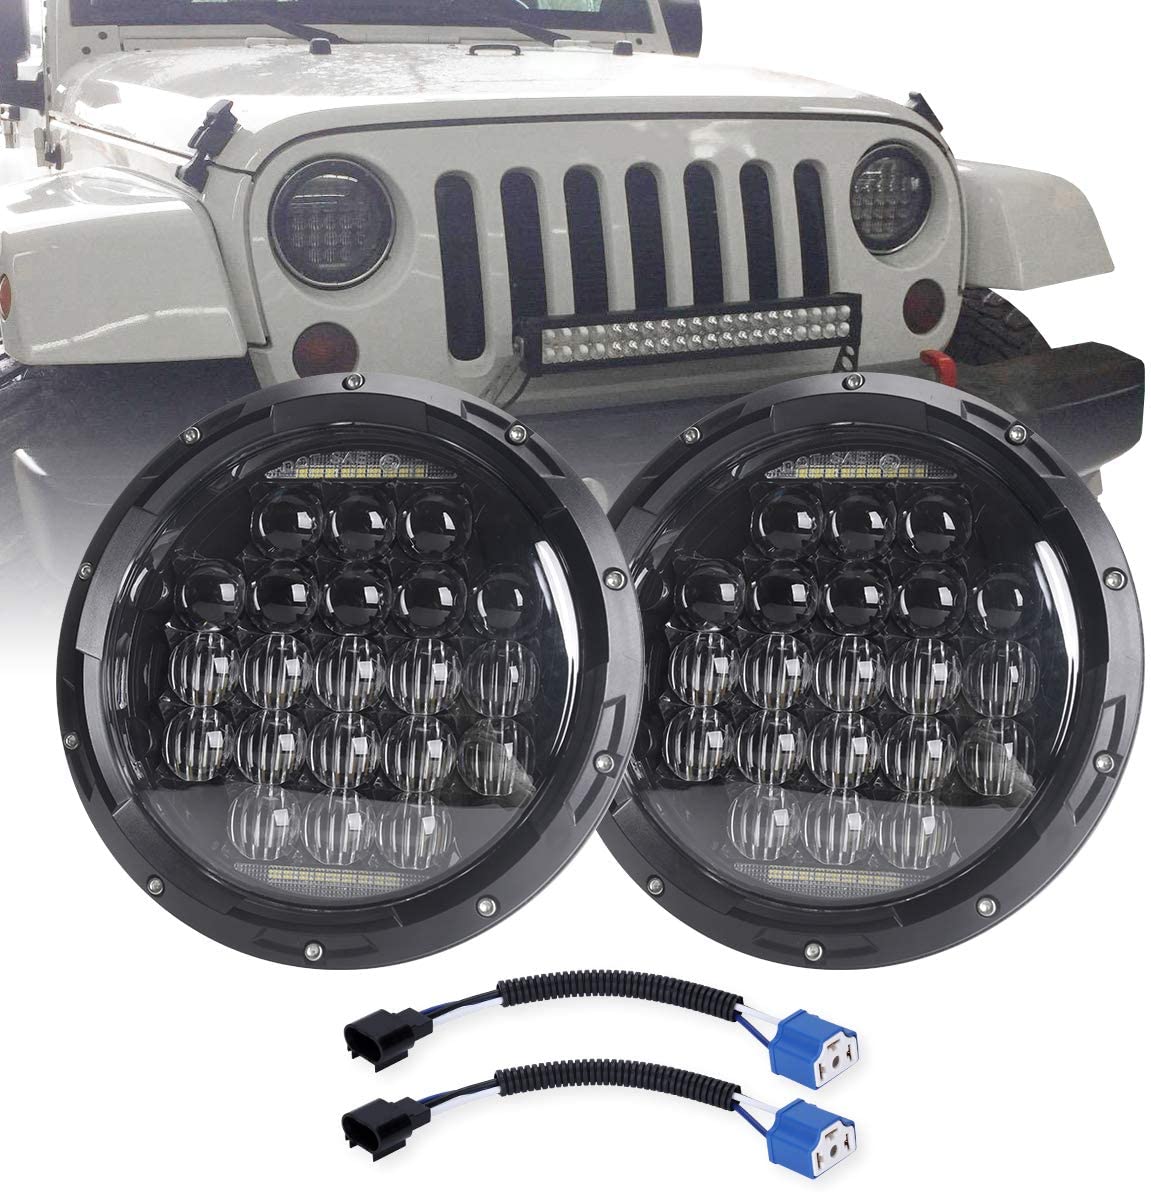 Buy COWONE 7 Inch Round 5D 2021 Design 130w LED Projector Headlight with  DRL Compatible with Jeep Wrangler JK TJ LJ CJ for Harley Motorcycles Online  in Senegal. B0744F5ZMD